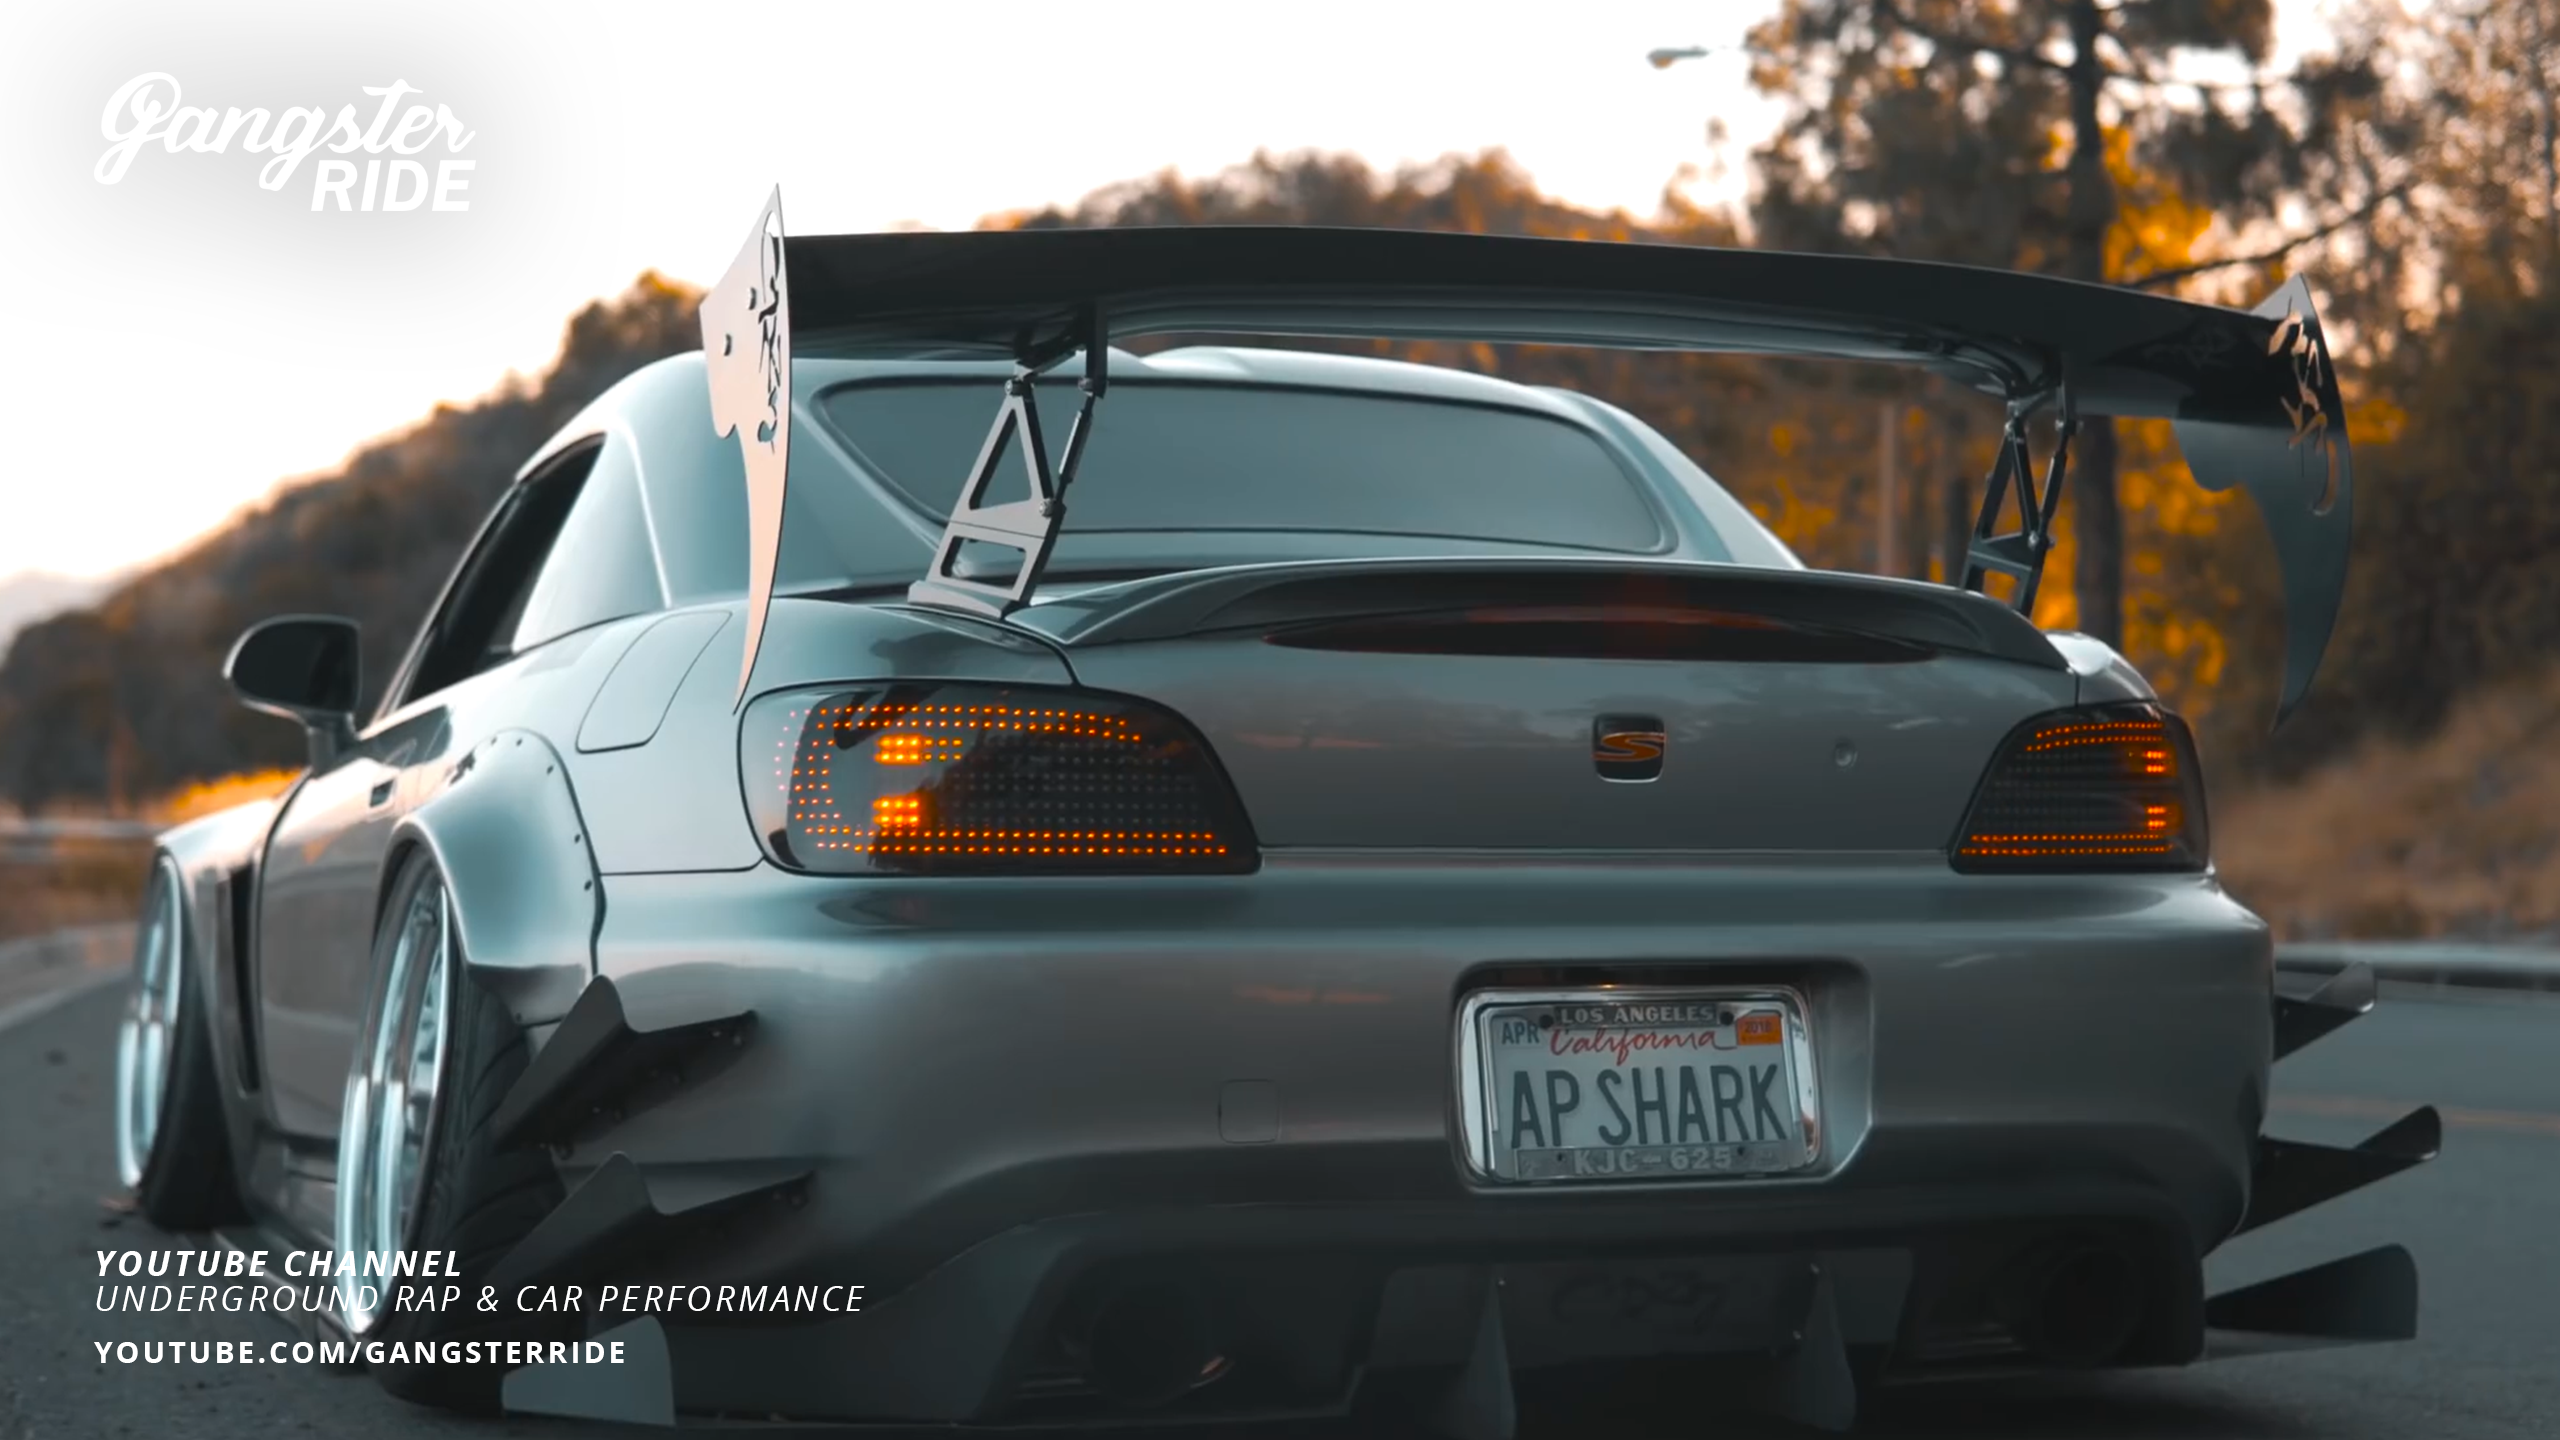 S2000 Honda S2000 The Shark S2000 YouTube Tuner Car Modified Stance Nation 2560x1440